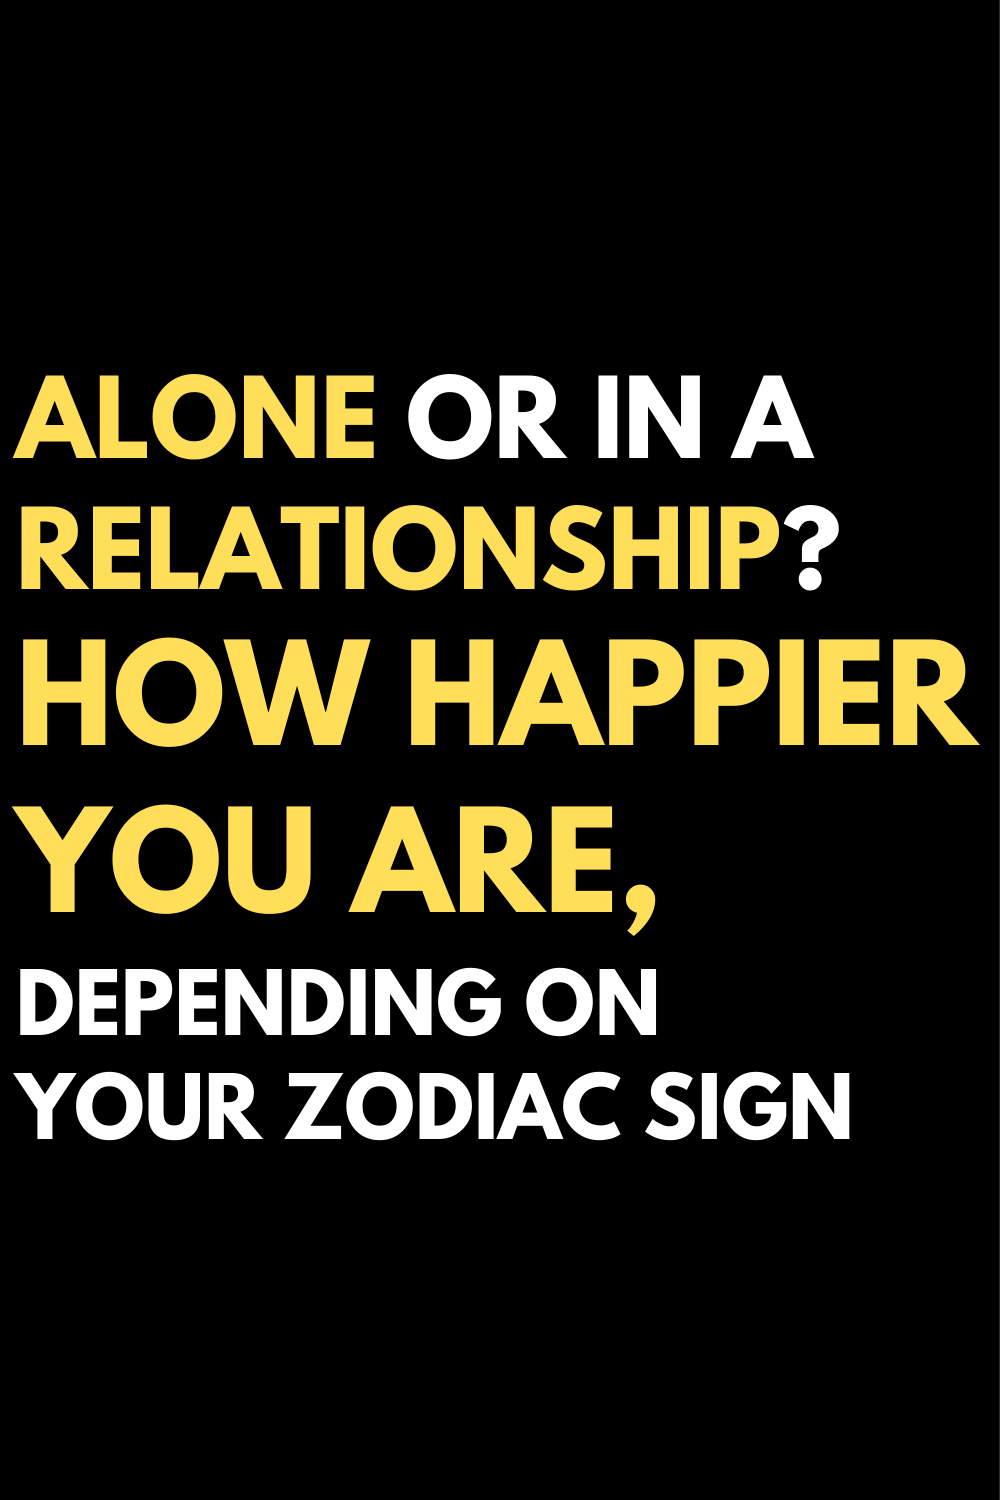 Alone or in a relationship? How happier you are, depending on your zodiac sign